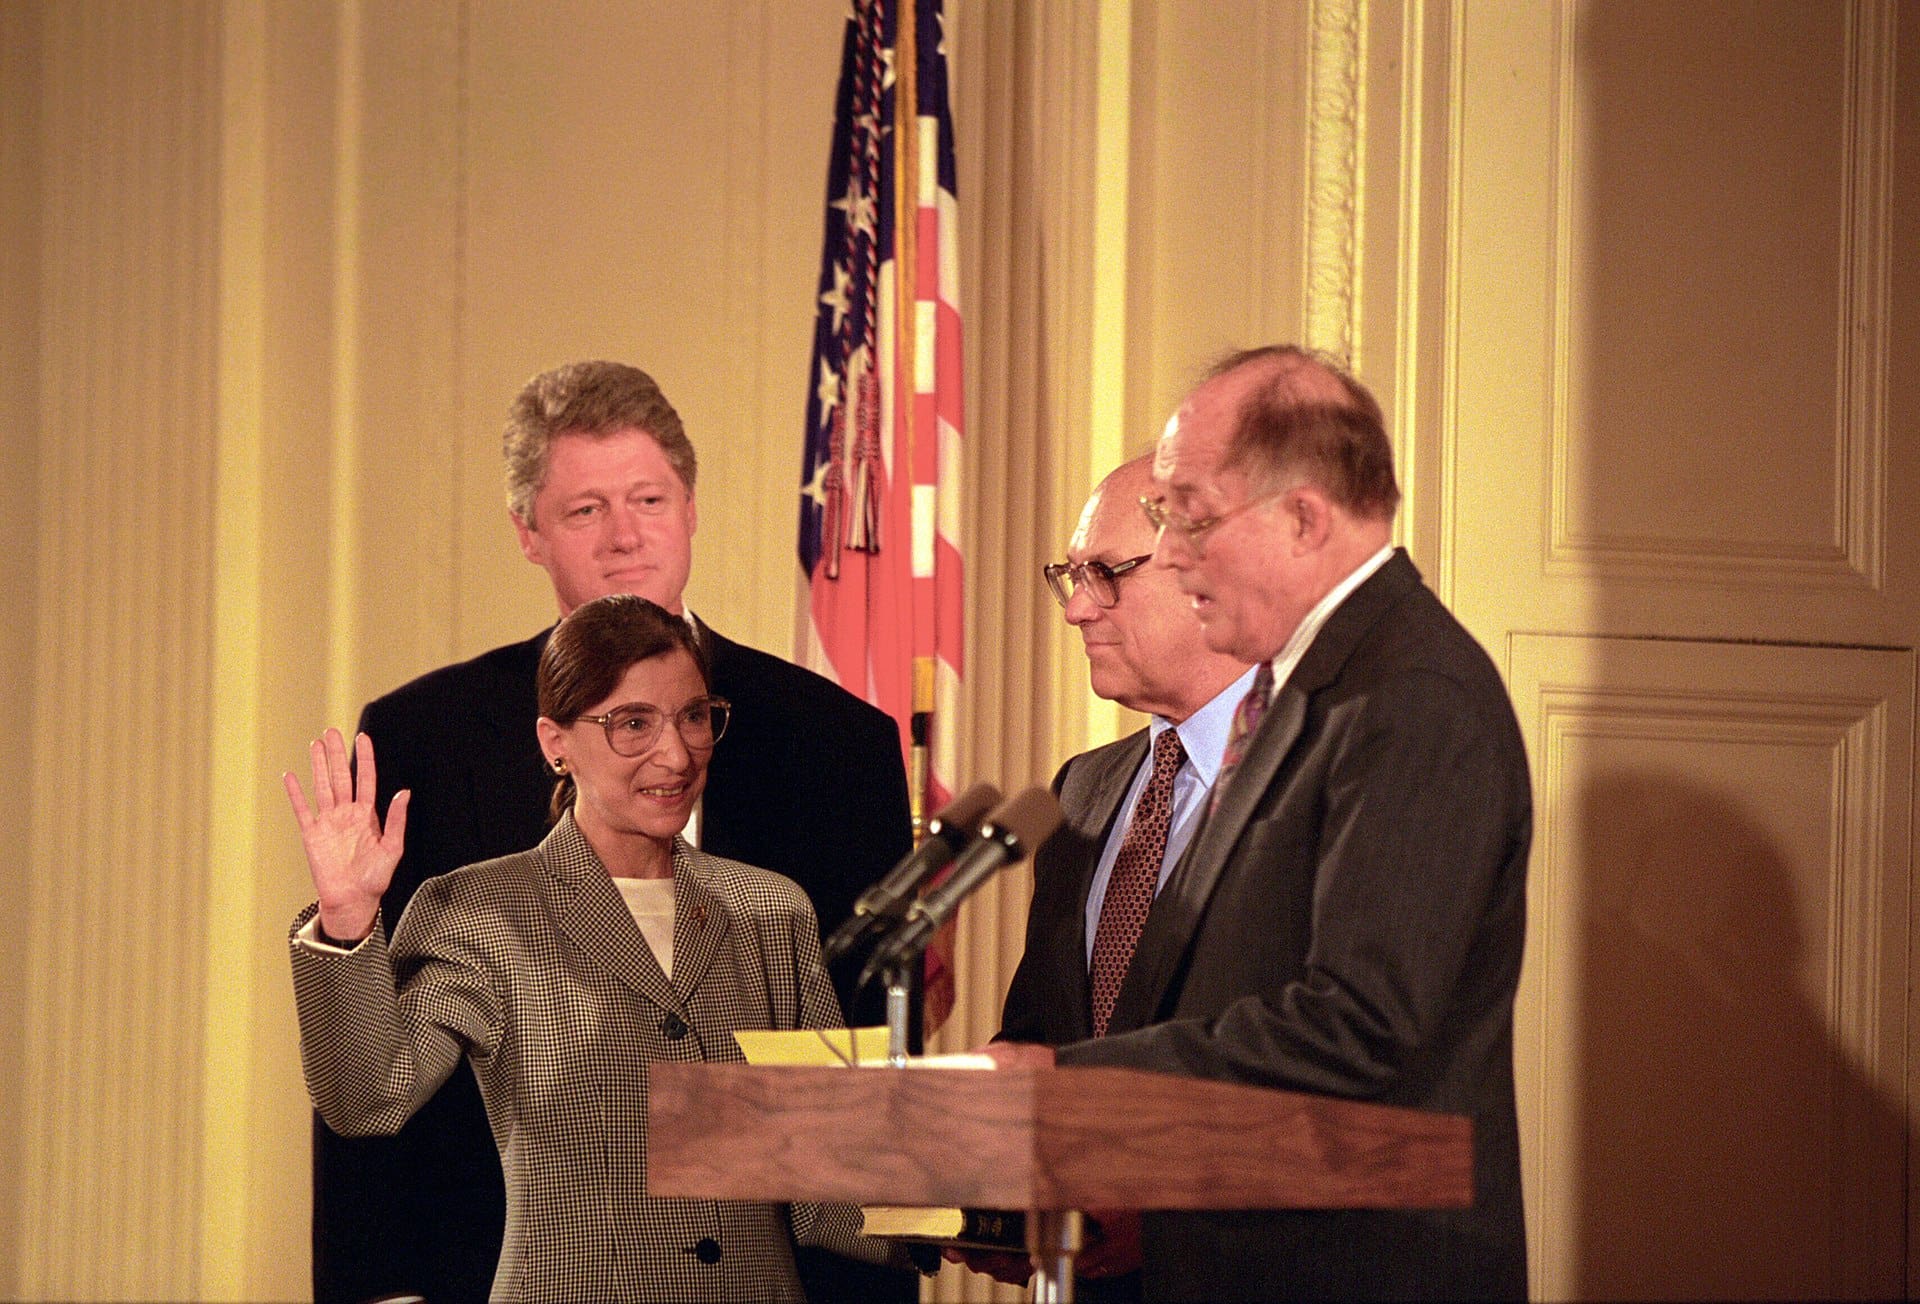 Chief Justice William Rehnquist swearing in Ginsburg as an associate justice of the Supreme Court, as her husband Martin Ginsburg and President Clinton watch.